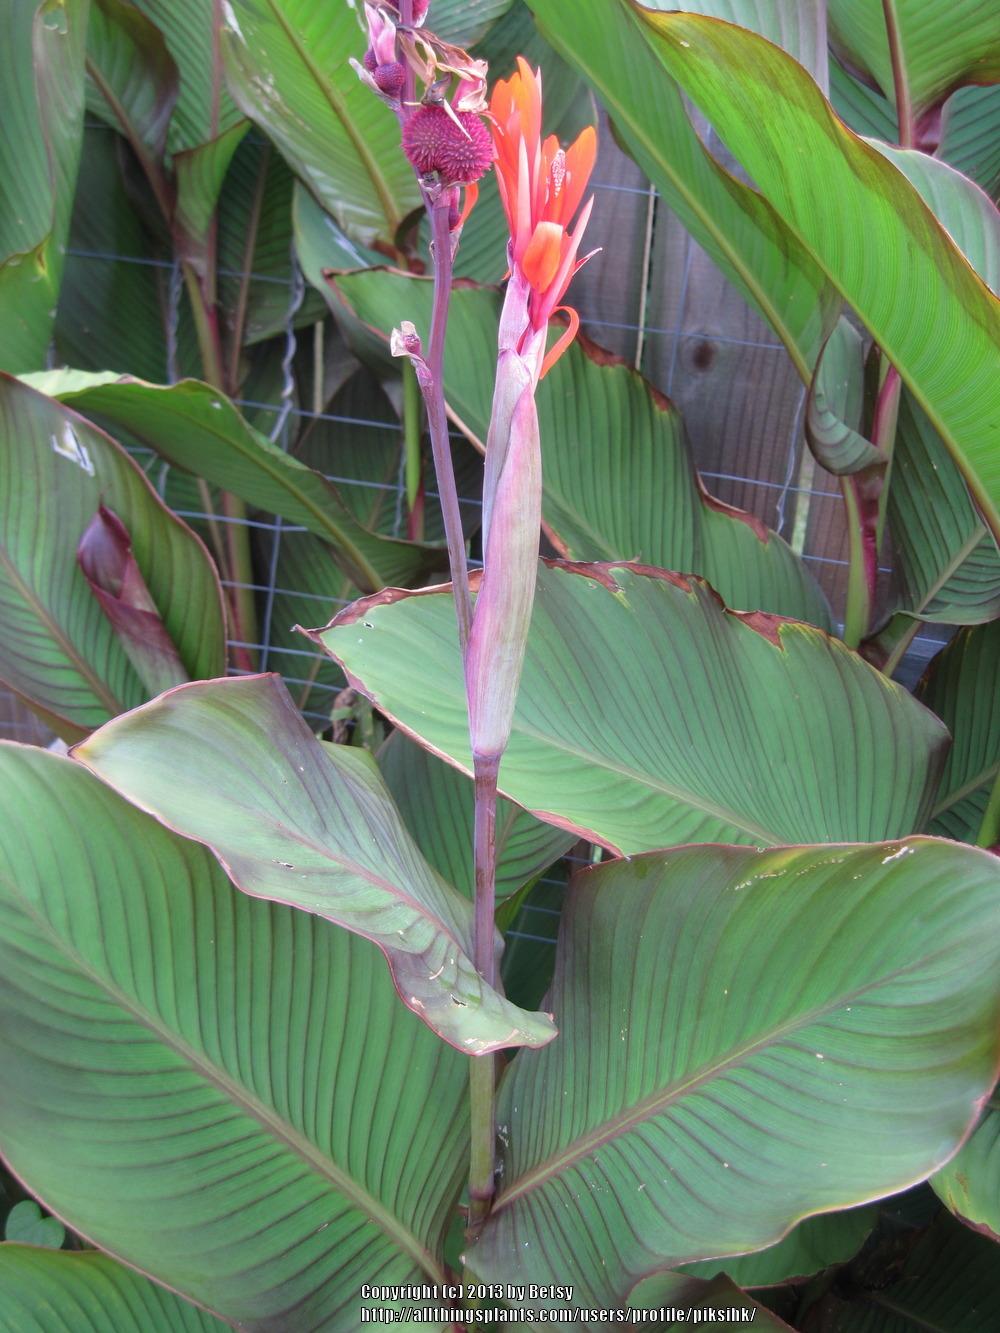 Photo of Cannas (Canna) uploaded by piksihk